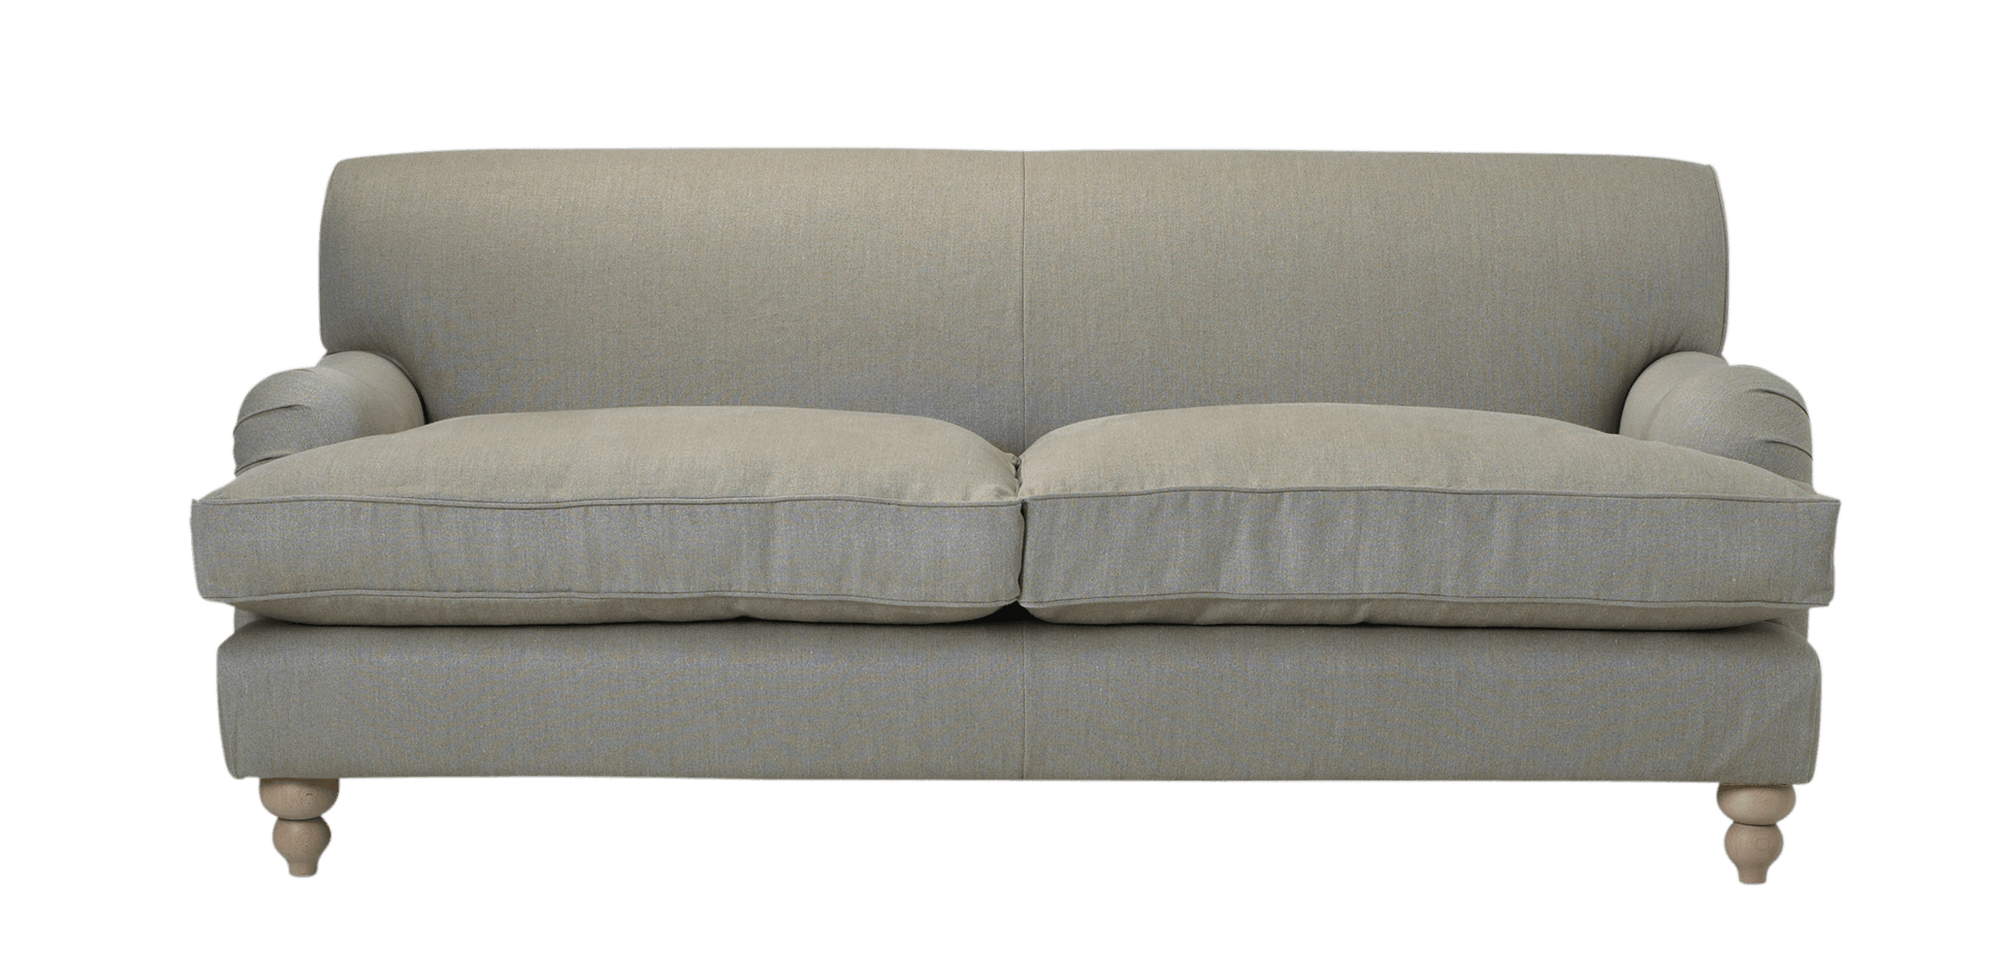 Couch PNG HD and HQ Image pngteam.com